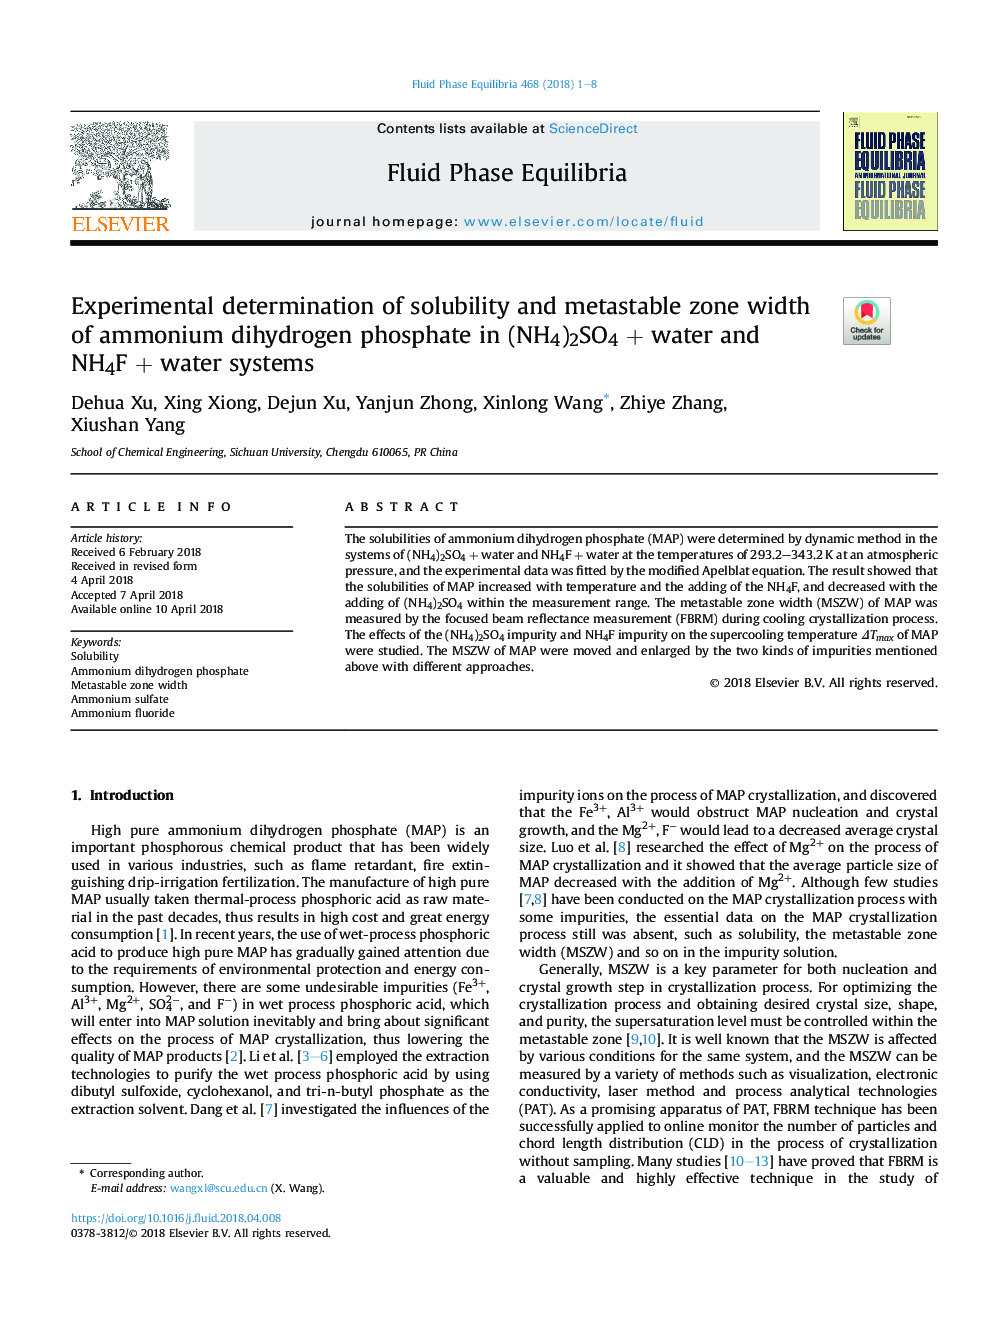 Experimental determination of solubility and metastable zone width of ammonium dihydrogen phosphate in (NH4)2SO4Â + water and NH4FÂ + water systems